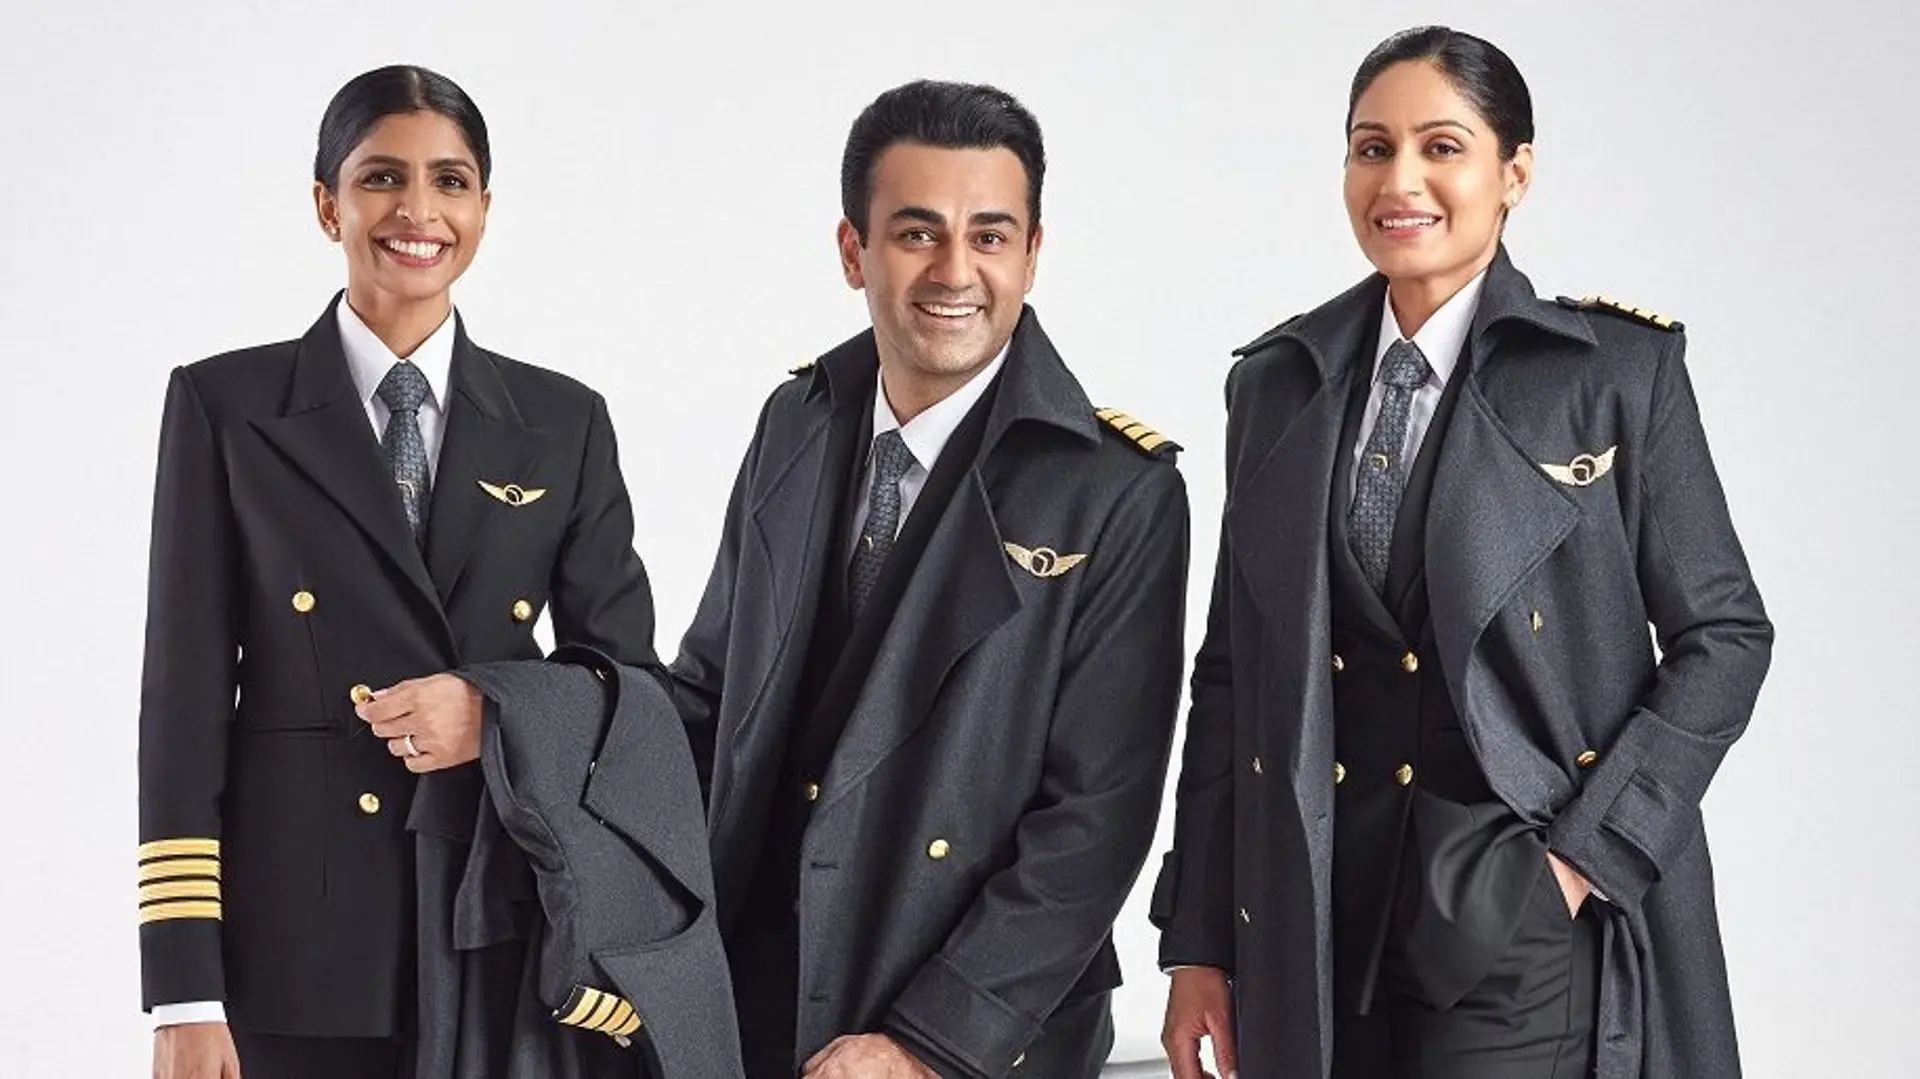 Airlines News - Air India catwalks new uniforms